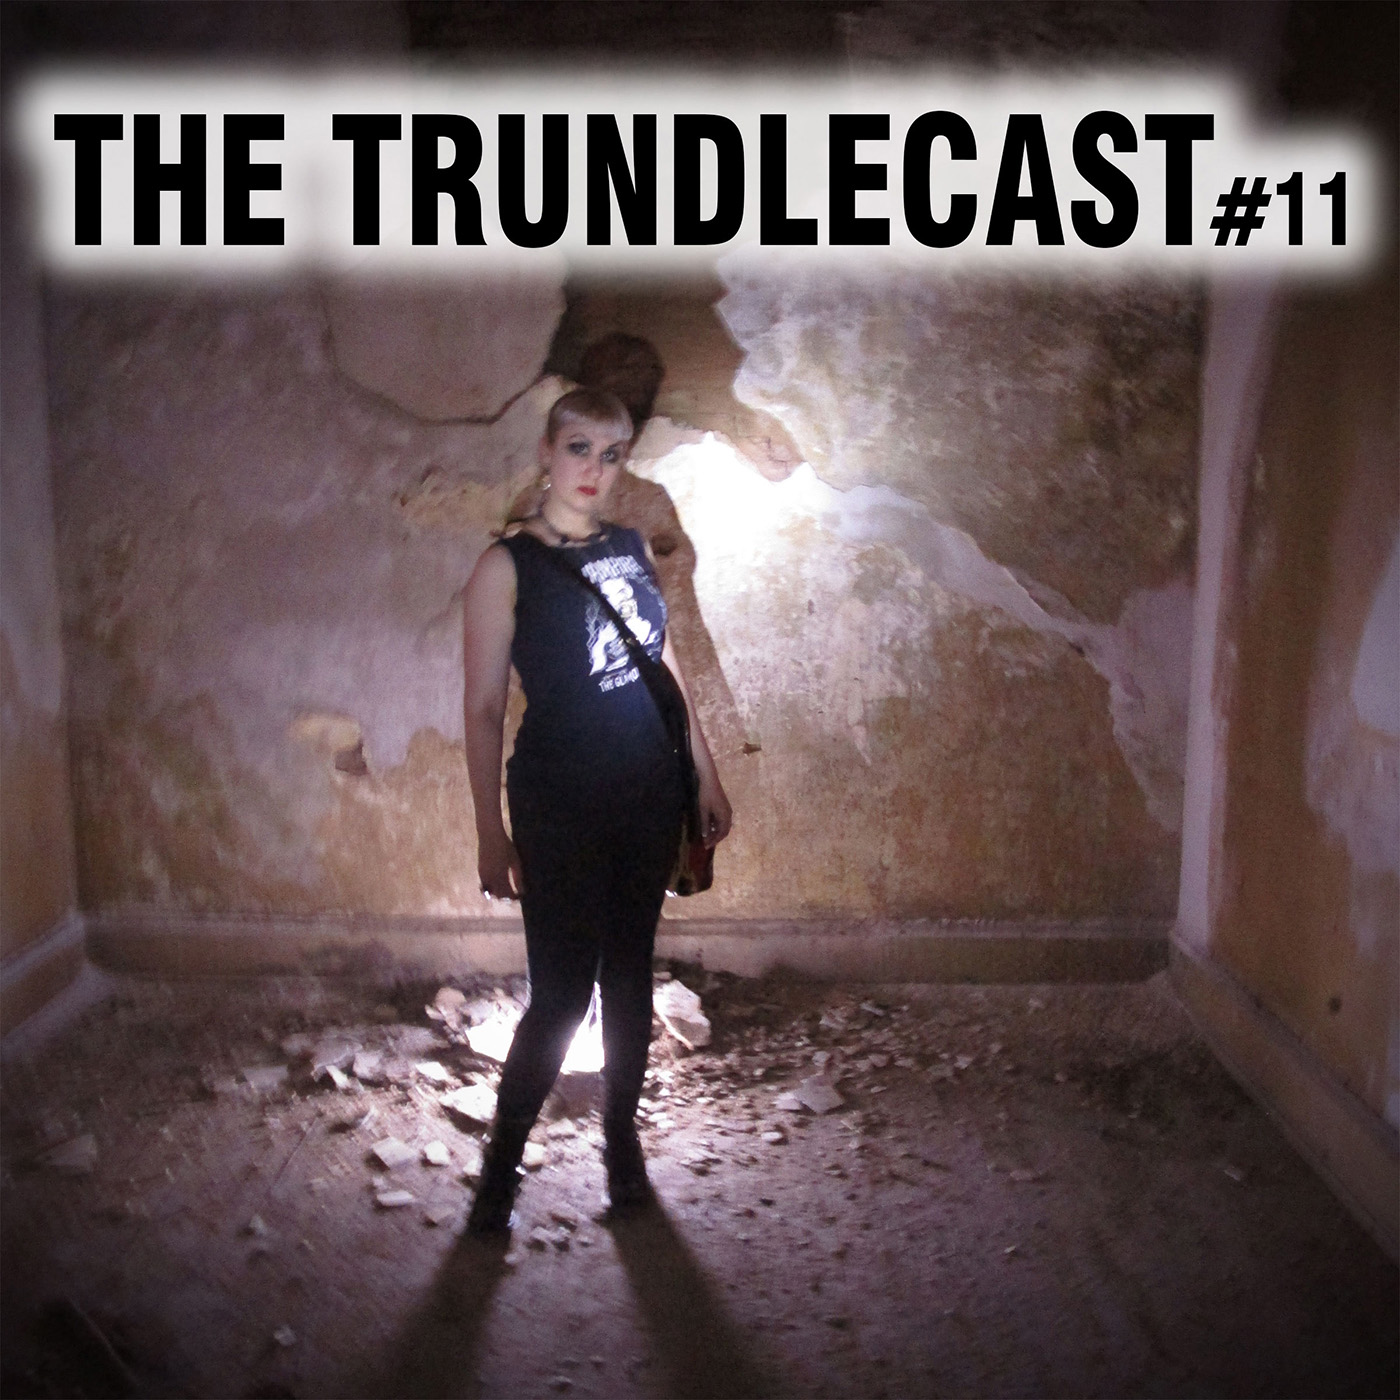 The 11th Trundlecast!